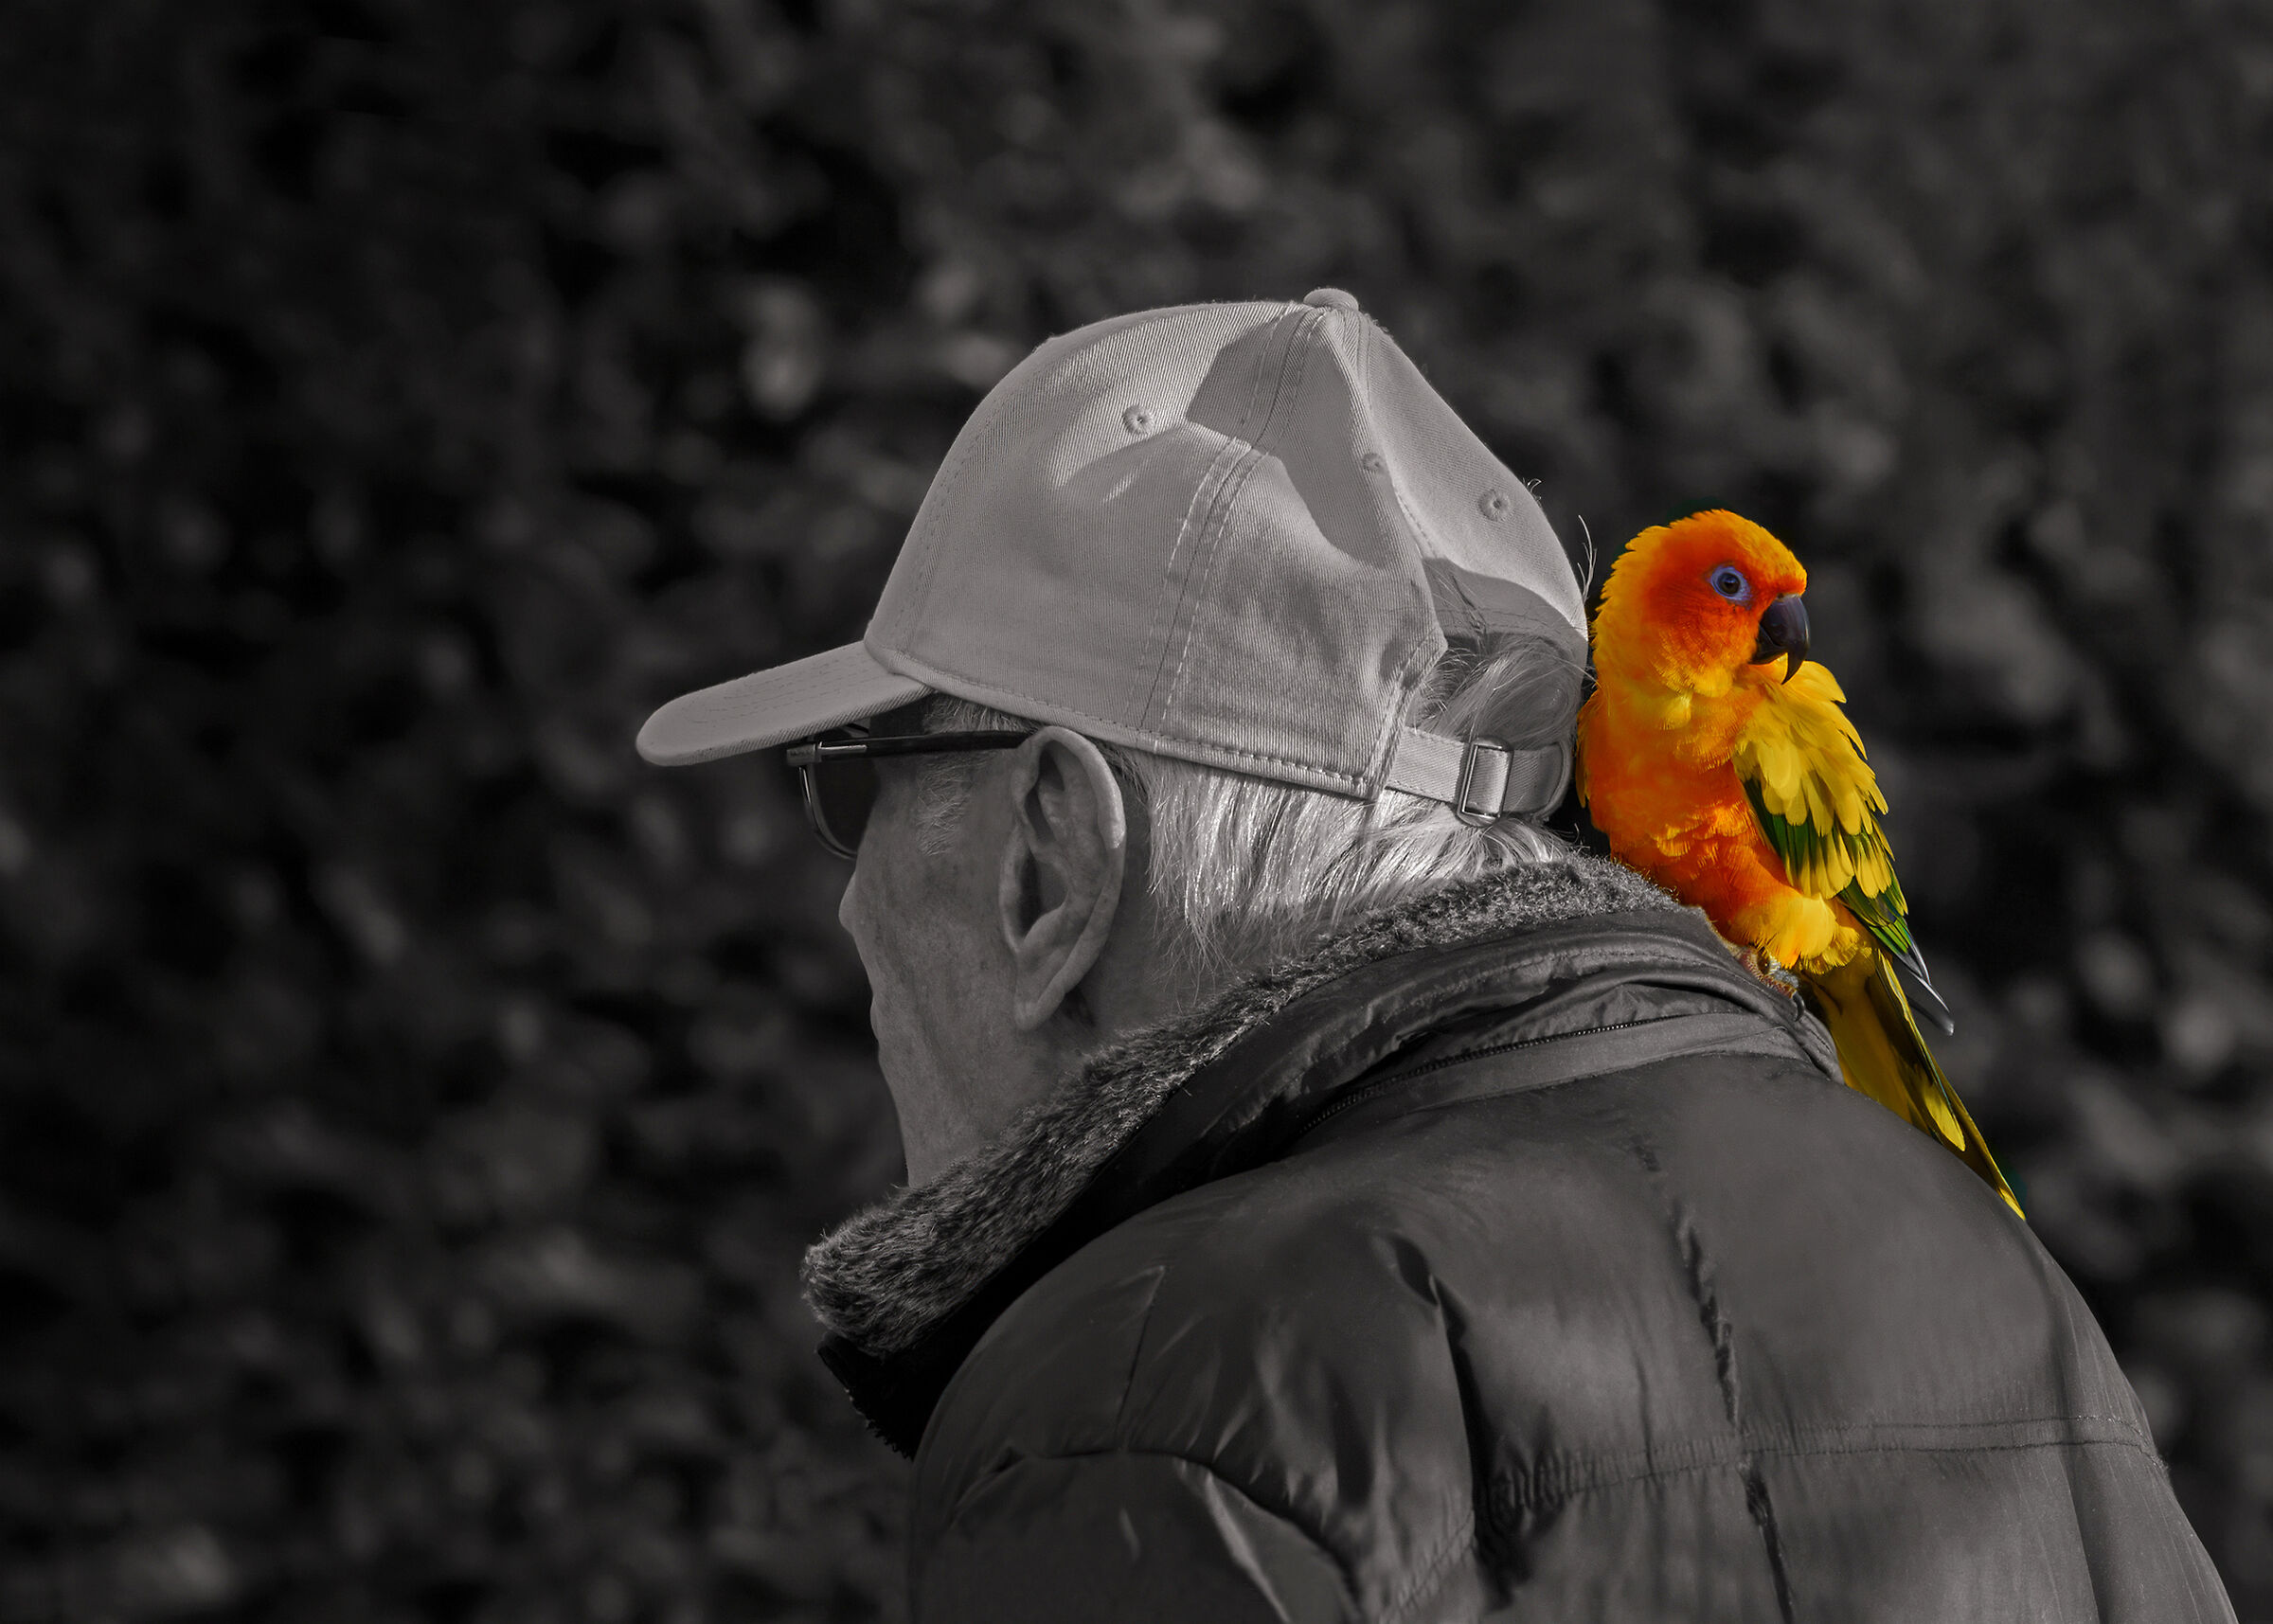 The man and the parrot...